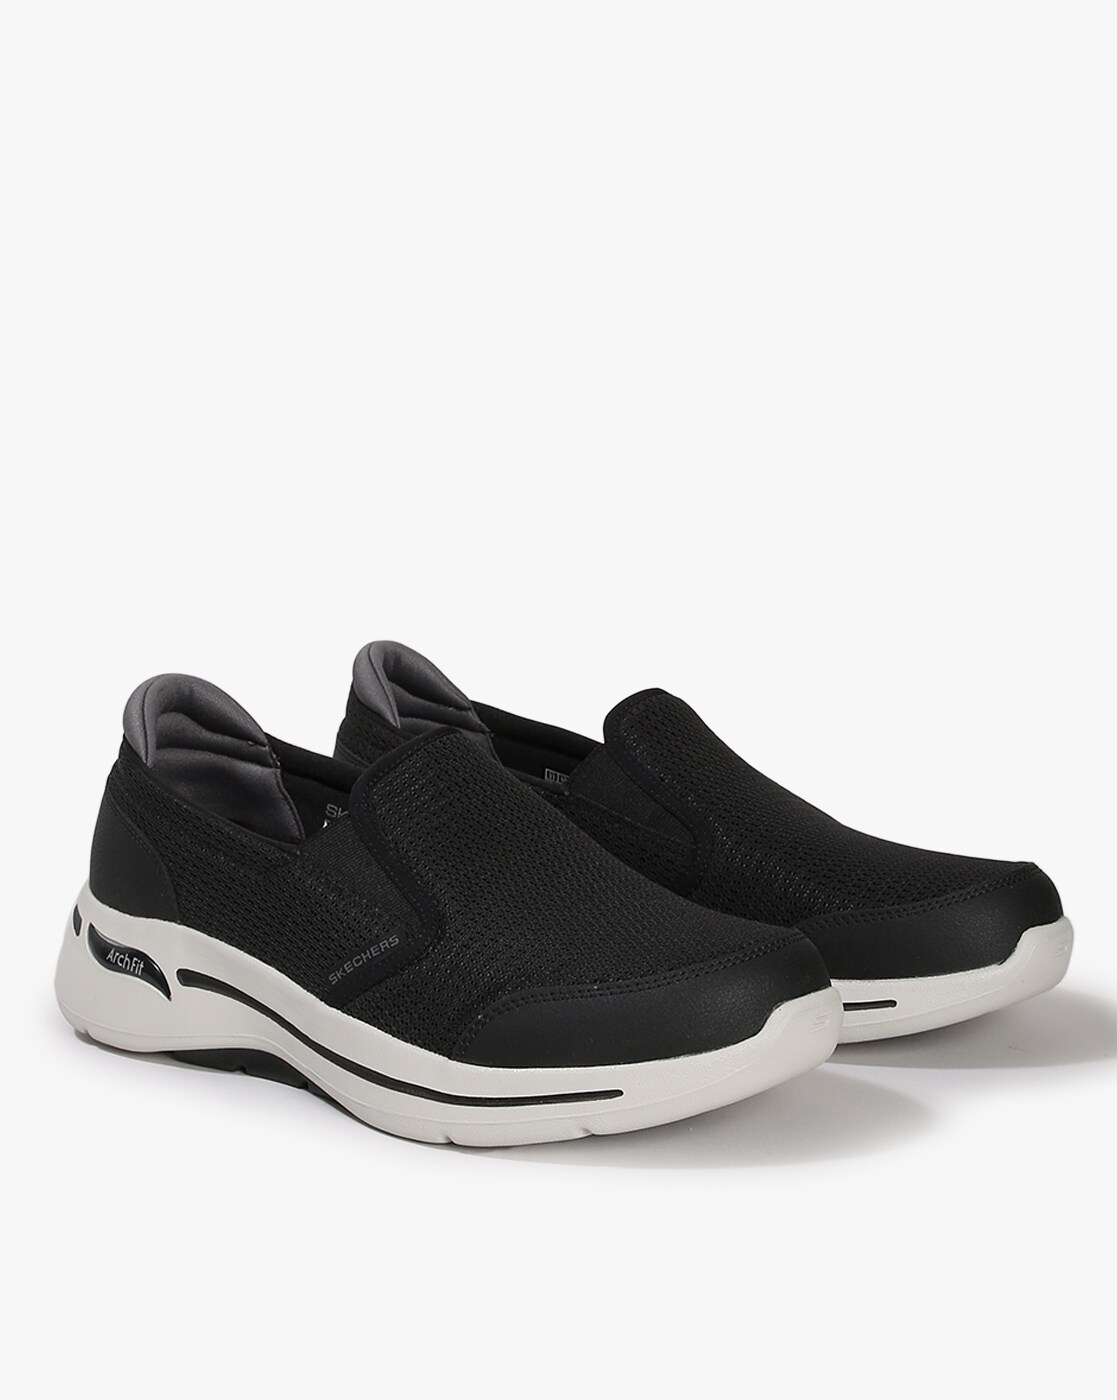 Men Go Walk Arch Fit Conference Slip-On Shoes